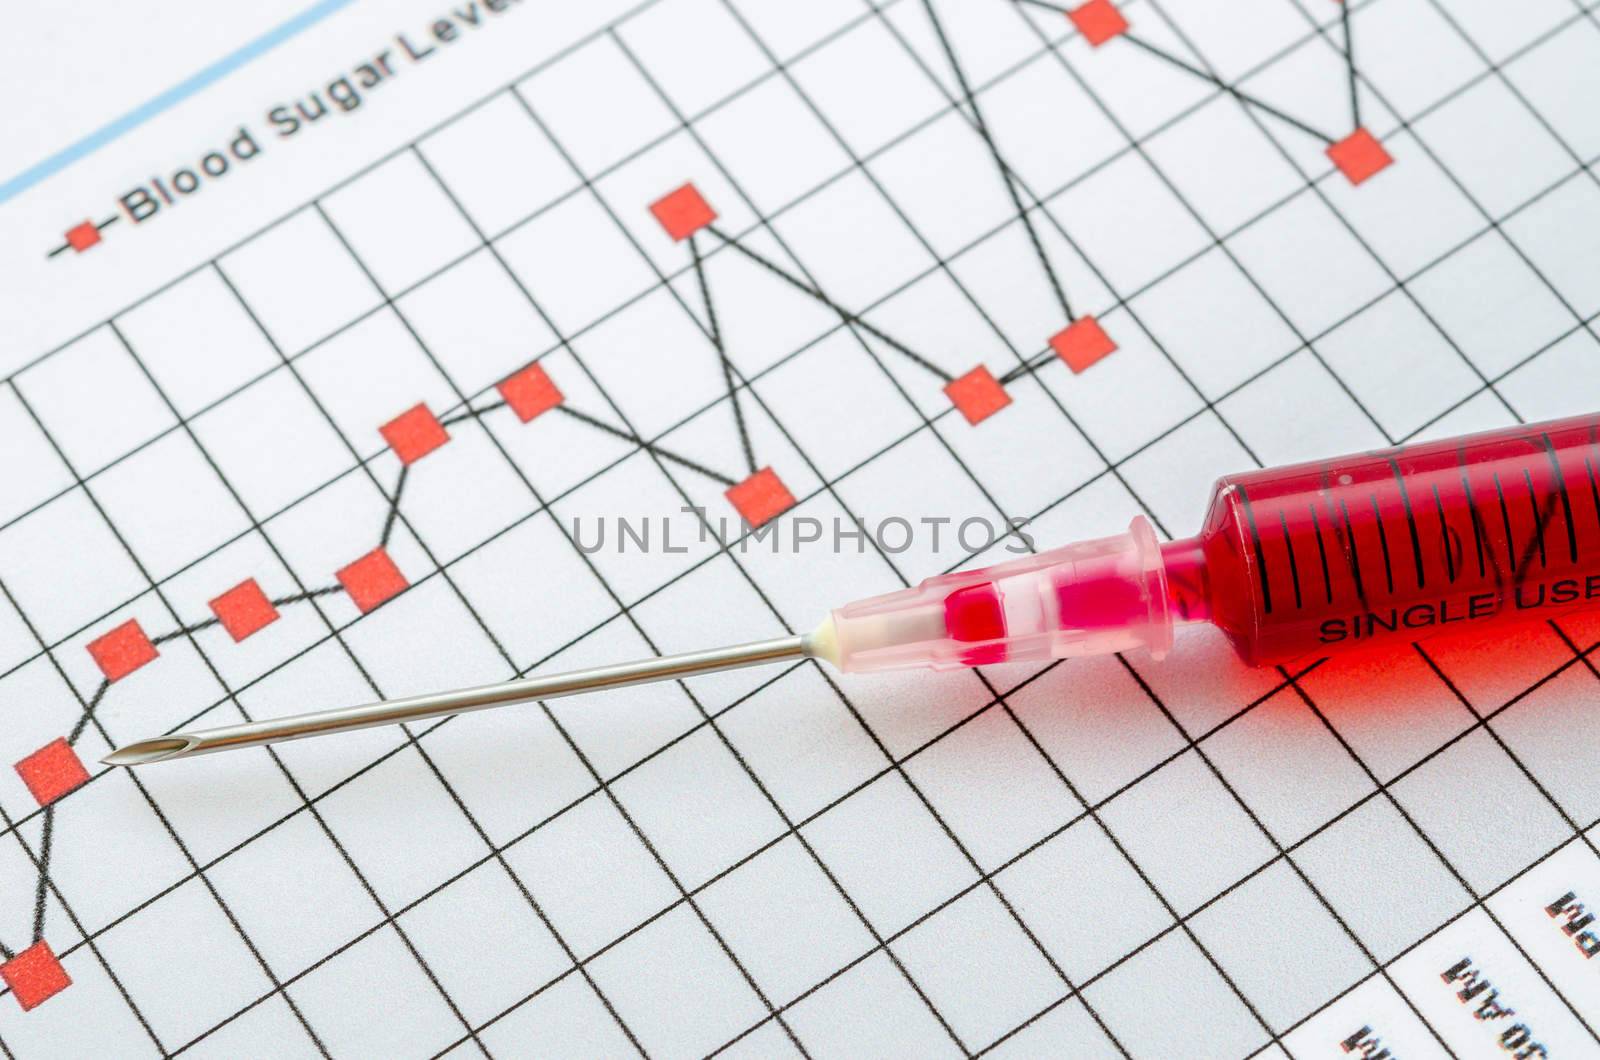 Sample blood for screening diabetic test in syringe on blood sugar control chart.